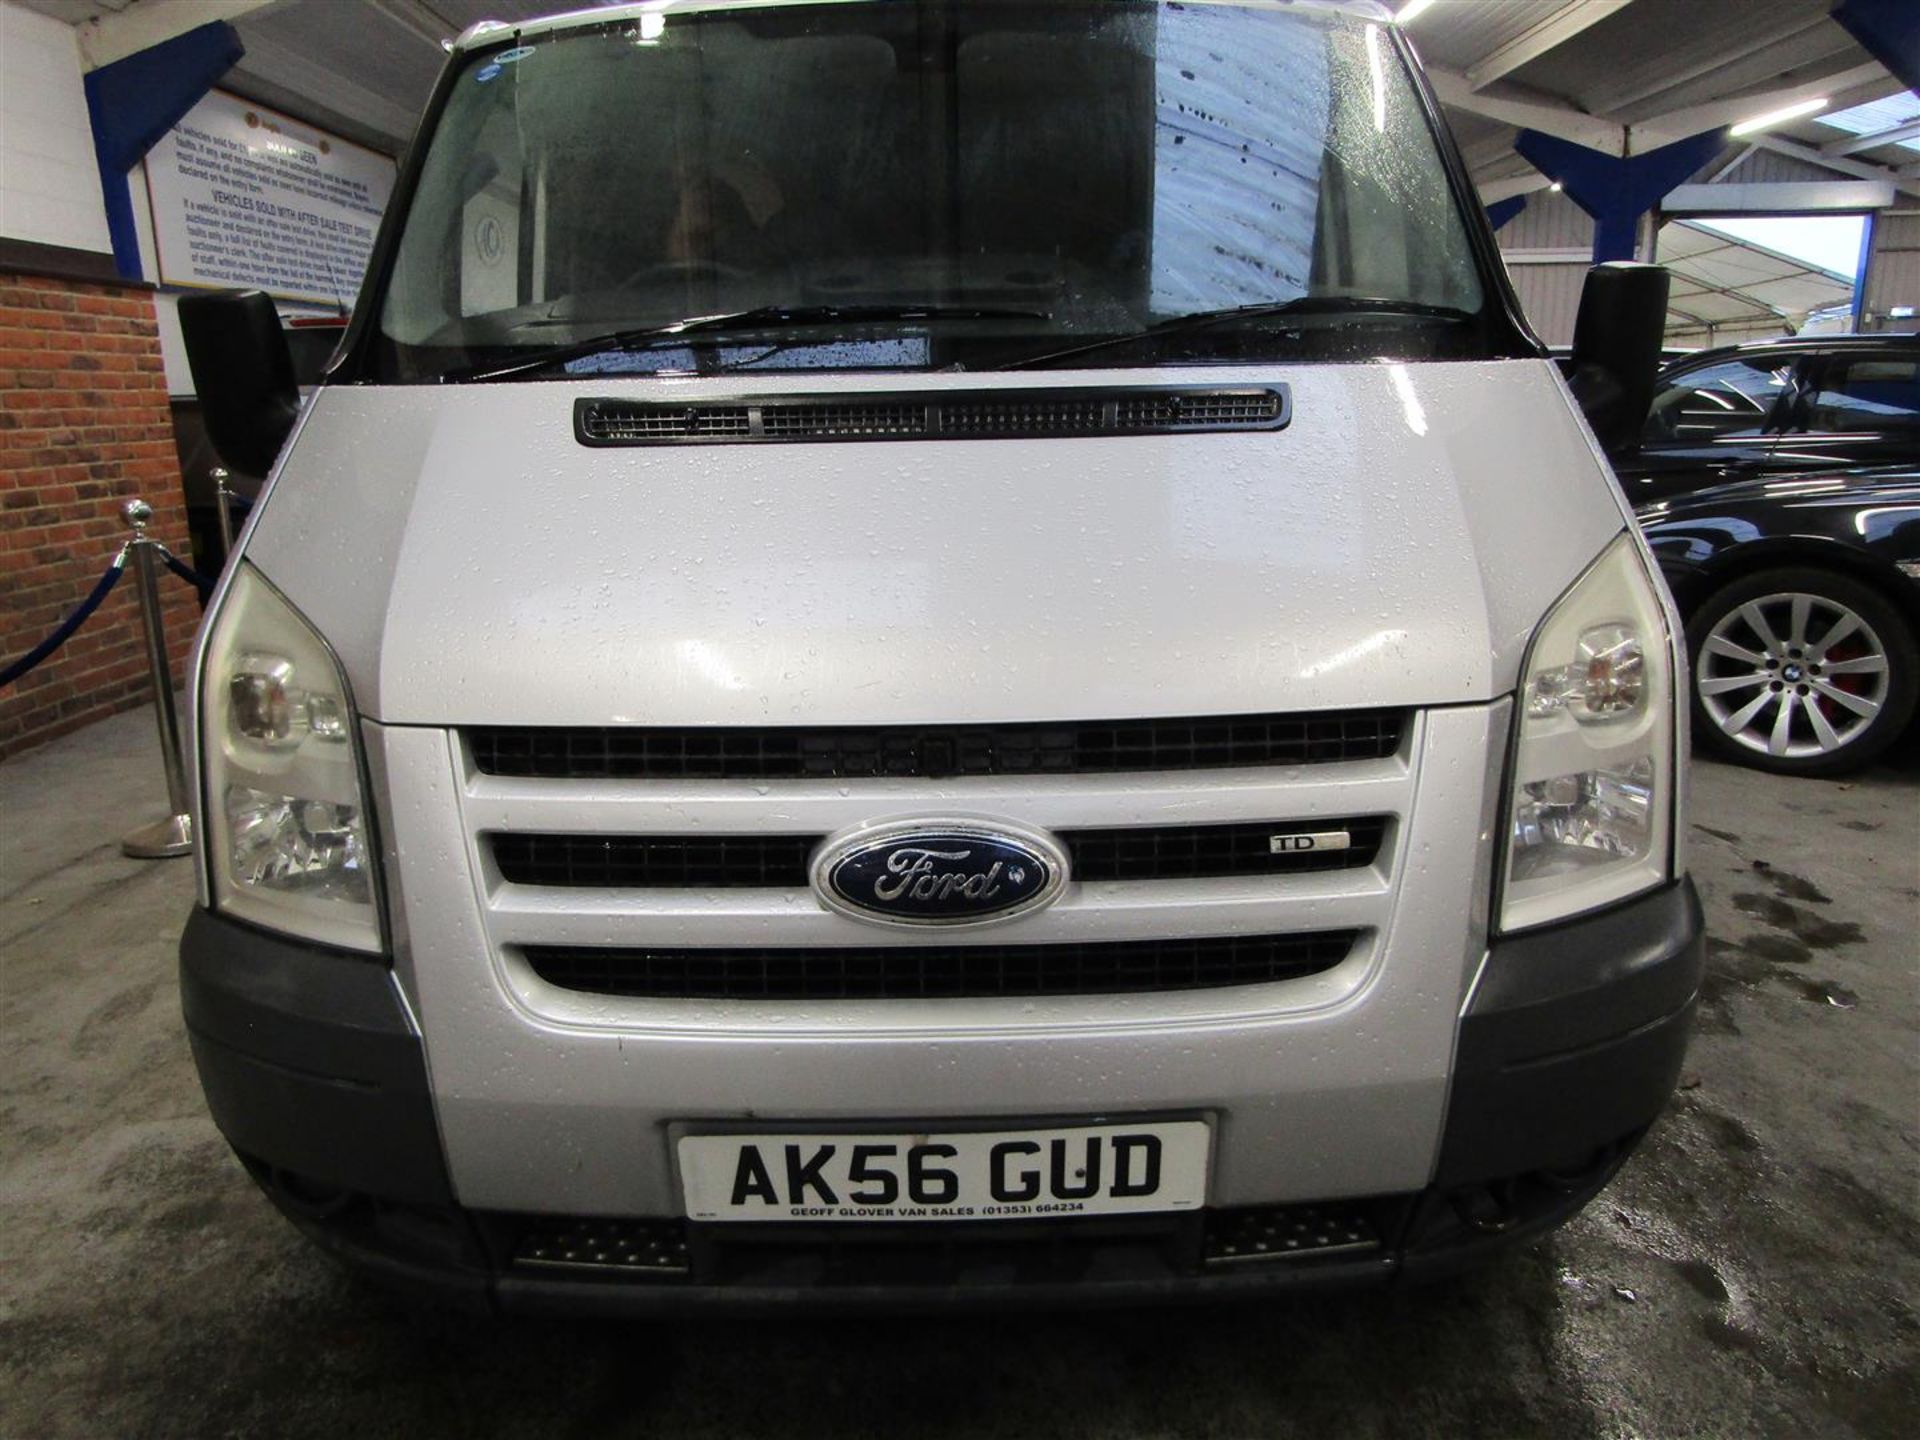 56 06 Ford Transit 130 T280S FWD - Image 2 of 28